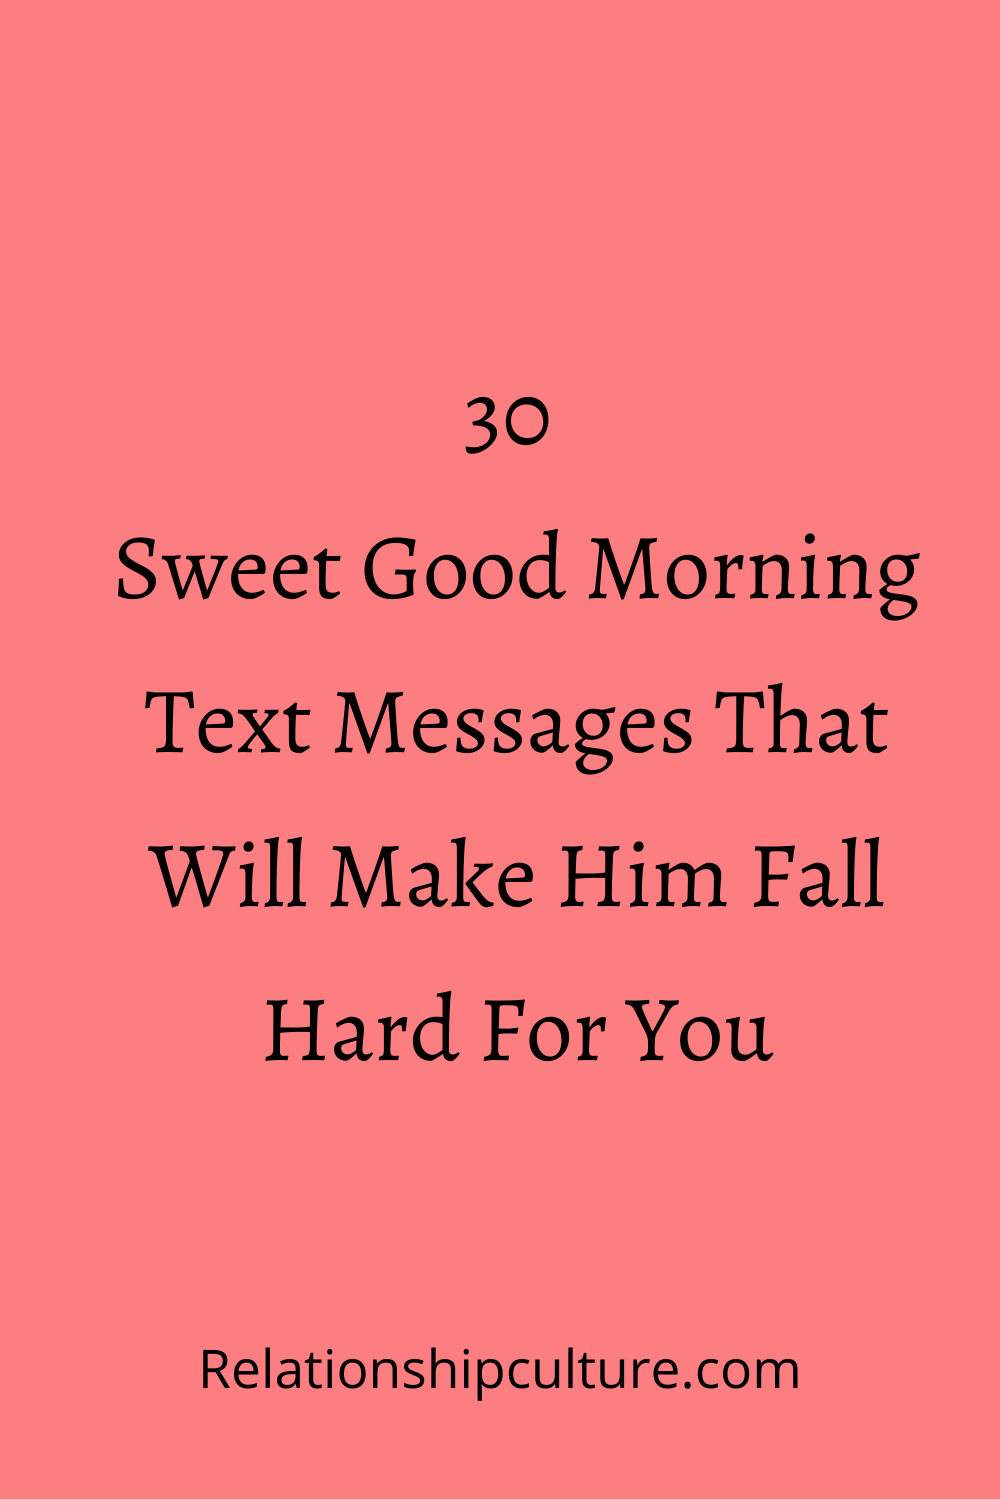 Good Morning Text To Make Him Fall In Love